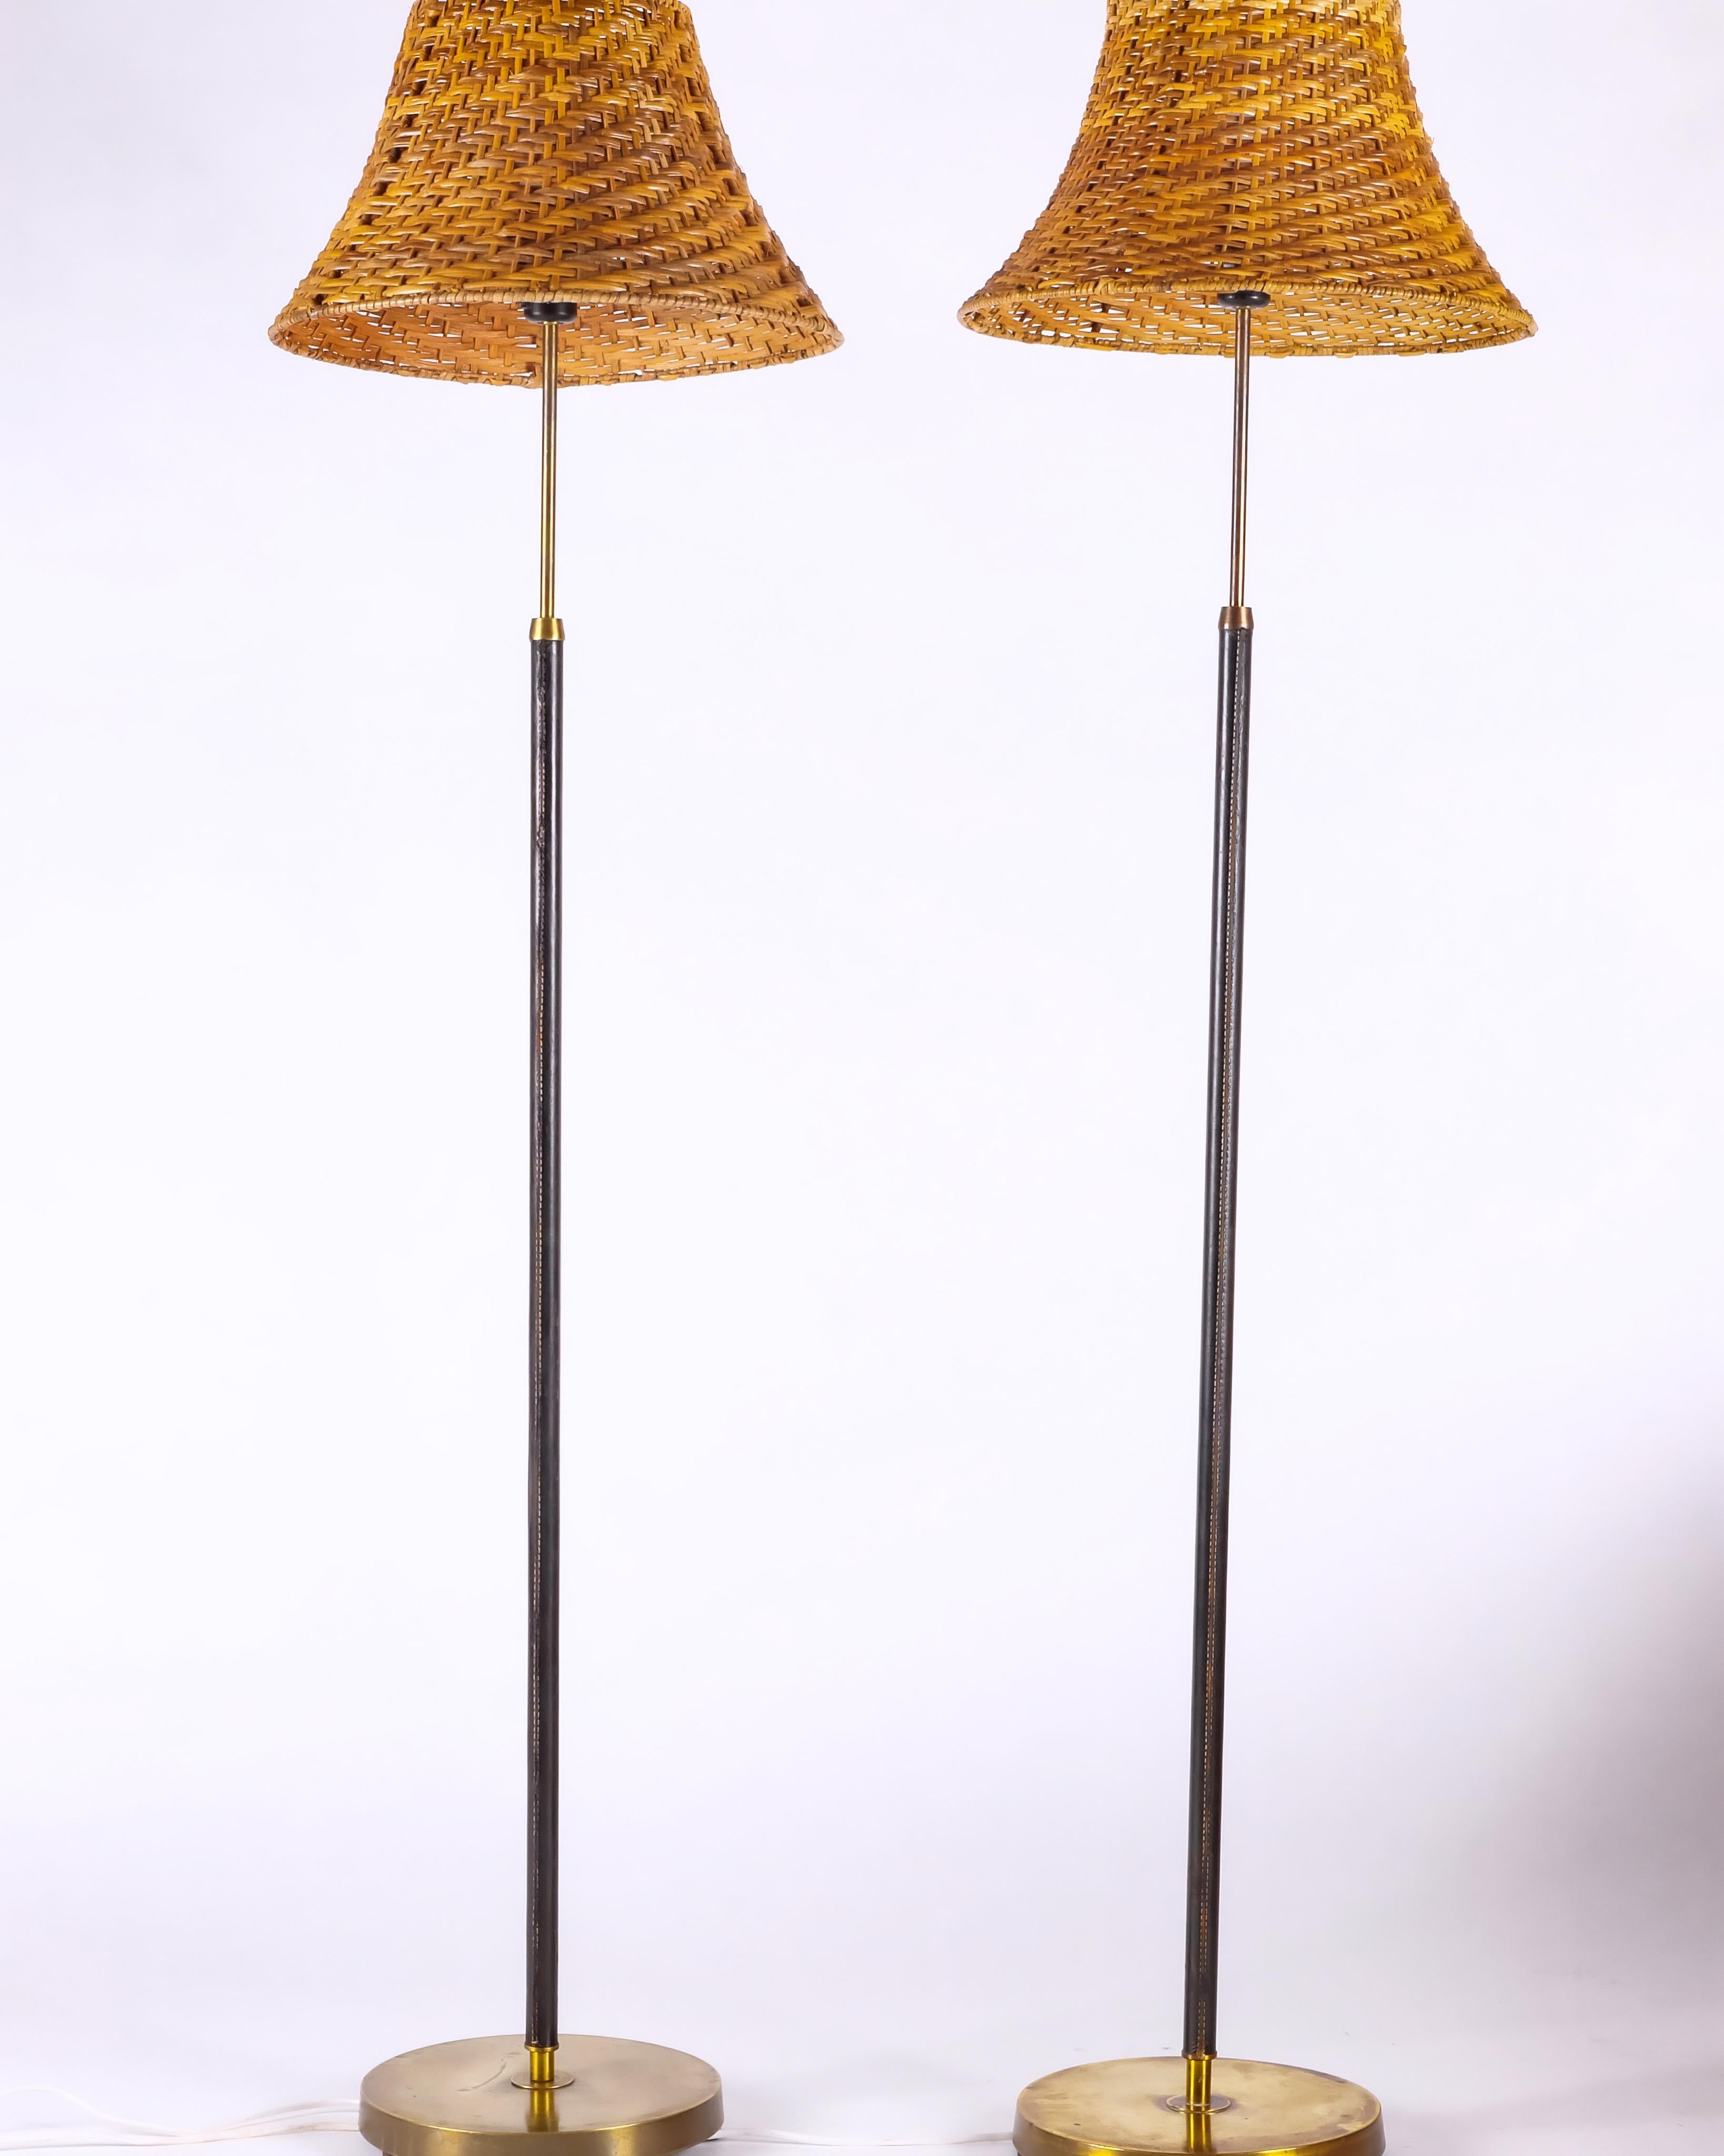 Standing pair of leather wrapped brass lamps, imported from Sweden and rewired for US. Rattan shades included. Age-appropriate patina and signs of use to the brass and the leather elements. Not adjustable. Sold as pair.